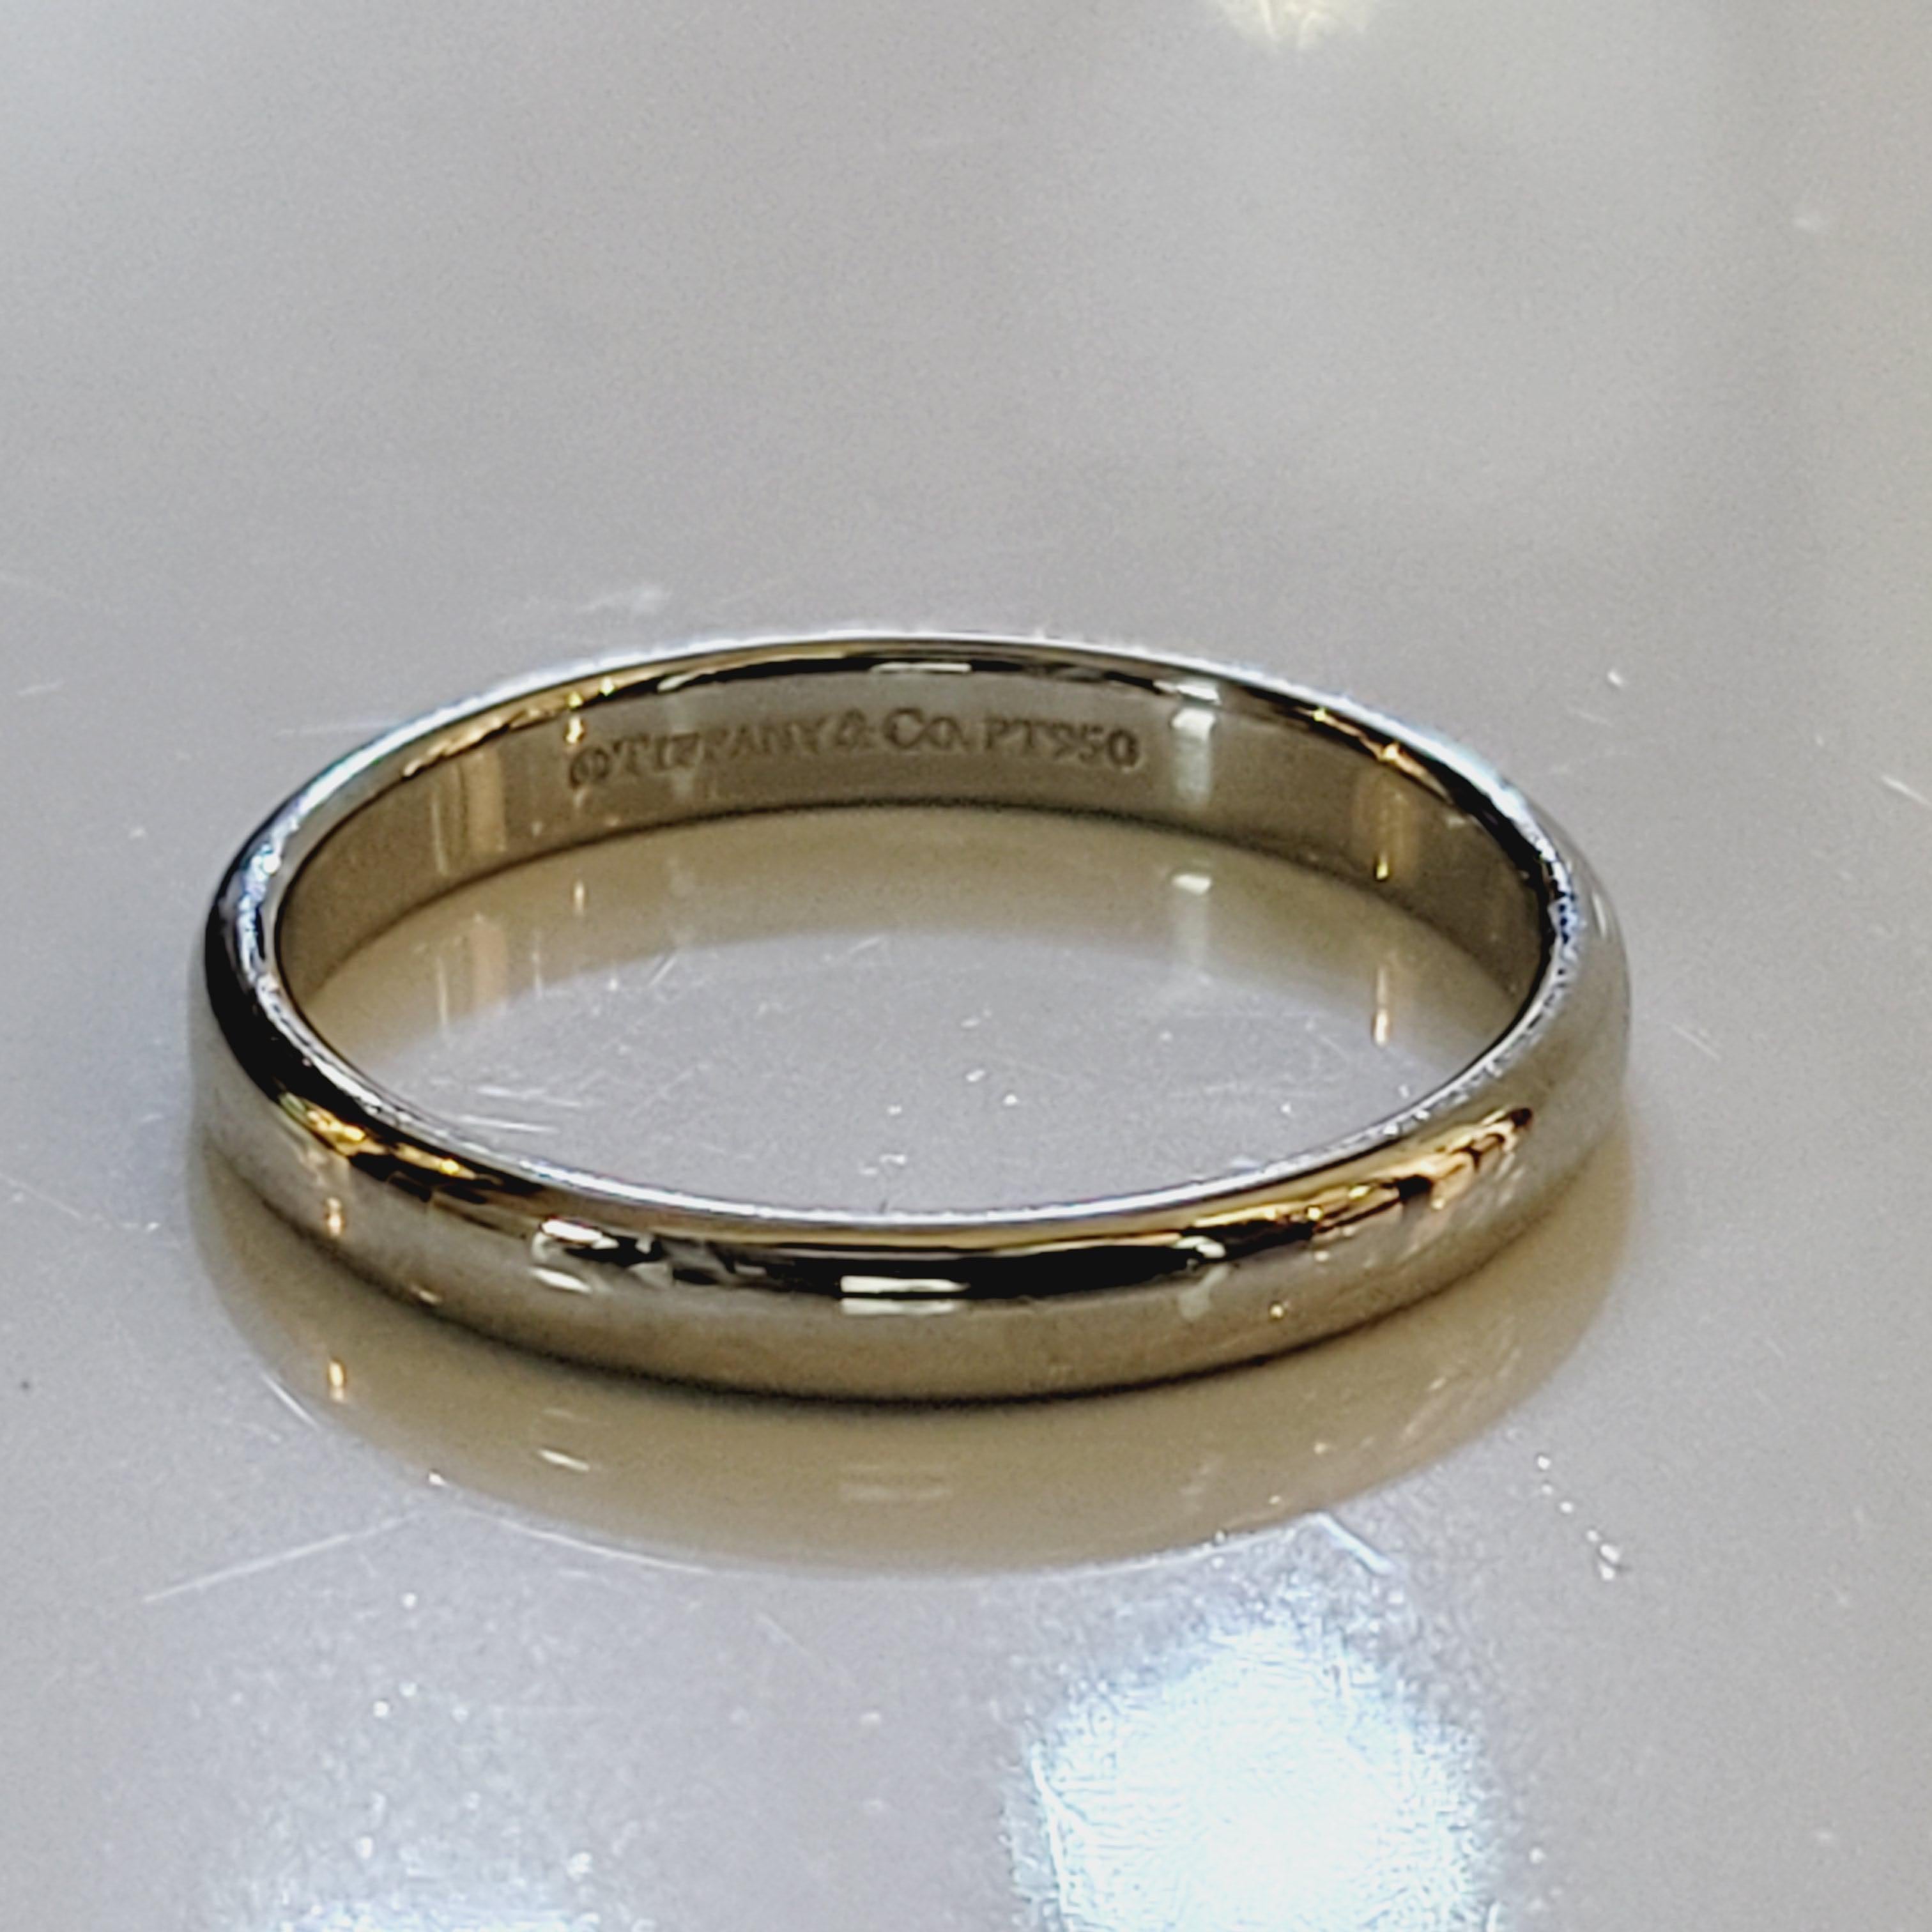 	
Occasion:	Wedding	
Sizable:	Yes
Metal:	Platinum
Brand:	Tiffany & Co.	
Ring Size:	  9 3/4	
Type:	Ring
Band Width:	3 mm
Base Metal:	Platinum, 950 parts per 1000	
Style:	Band
Retial $1850
Sale $995